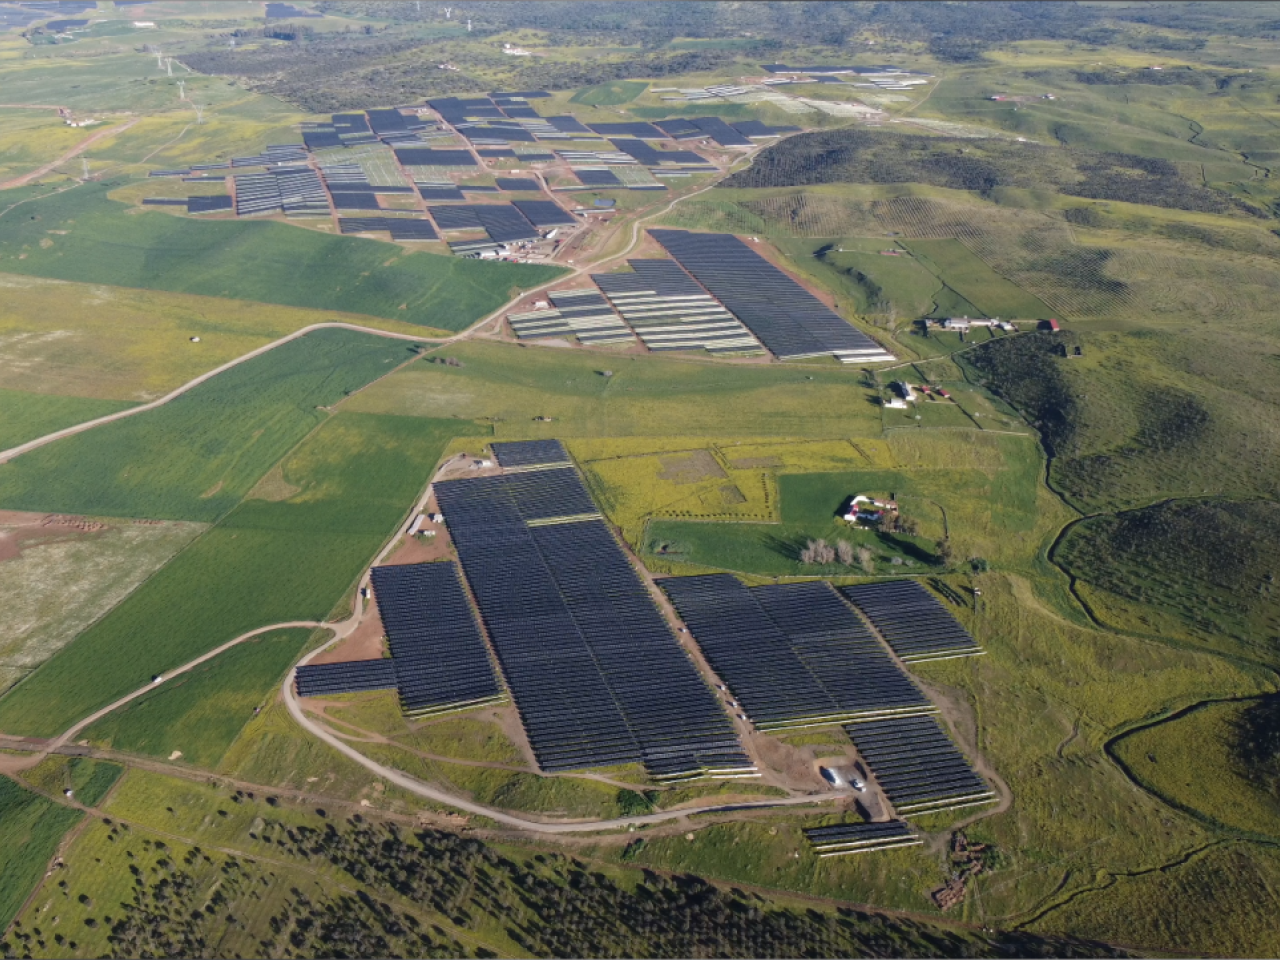 Aerial panoramic view of green fields, solar panels covering parts.